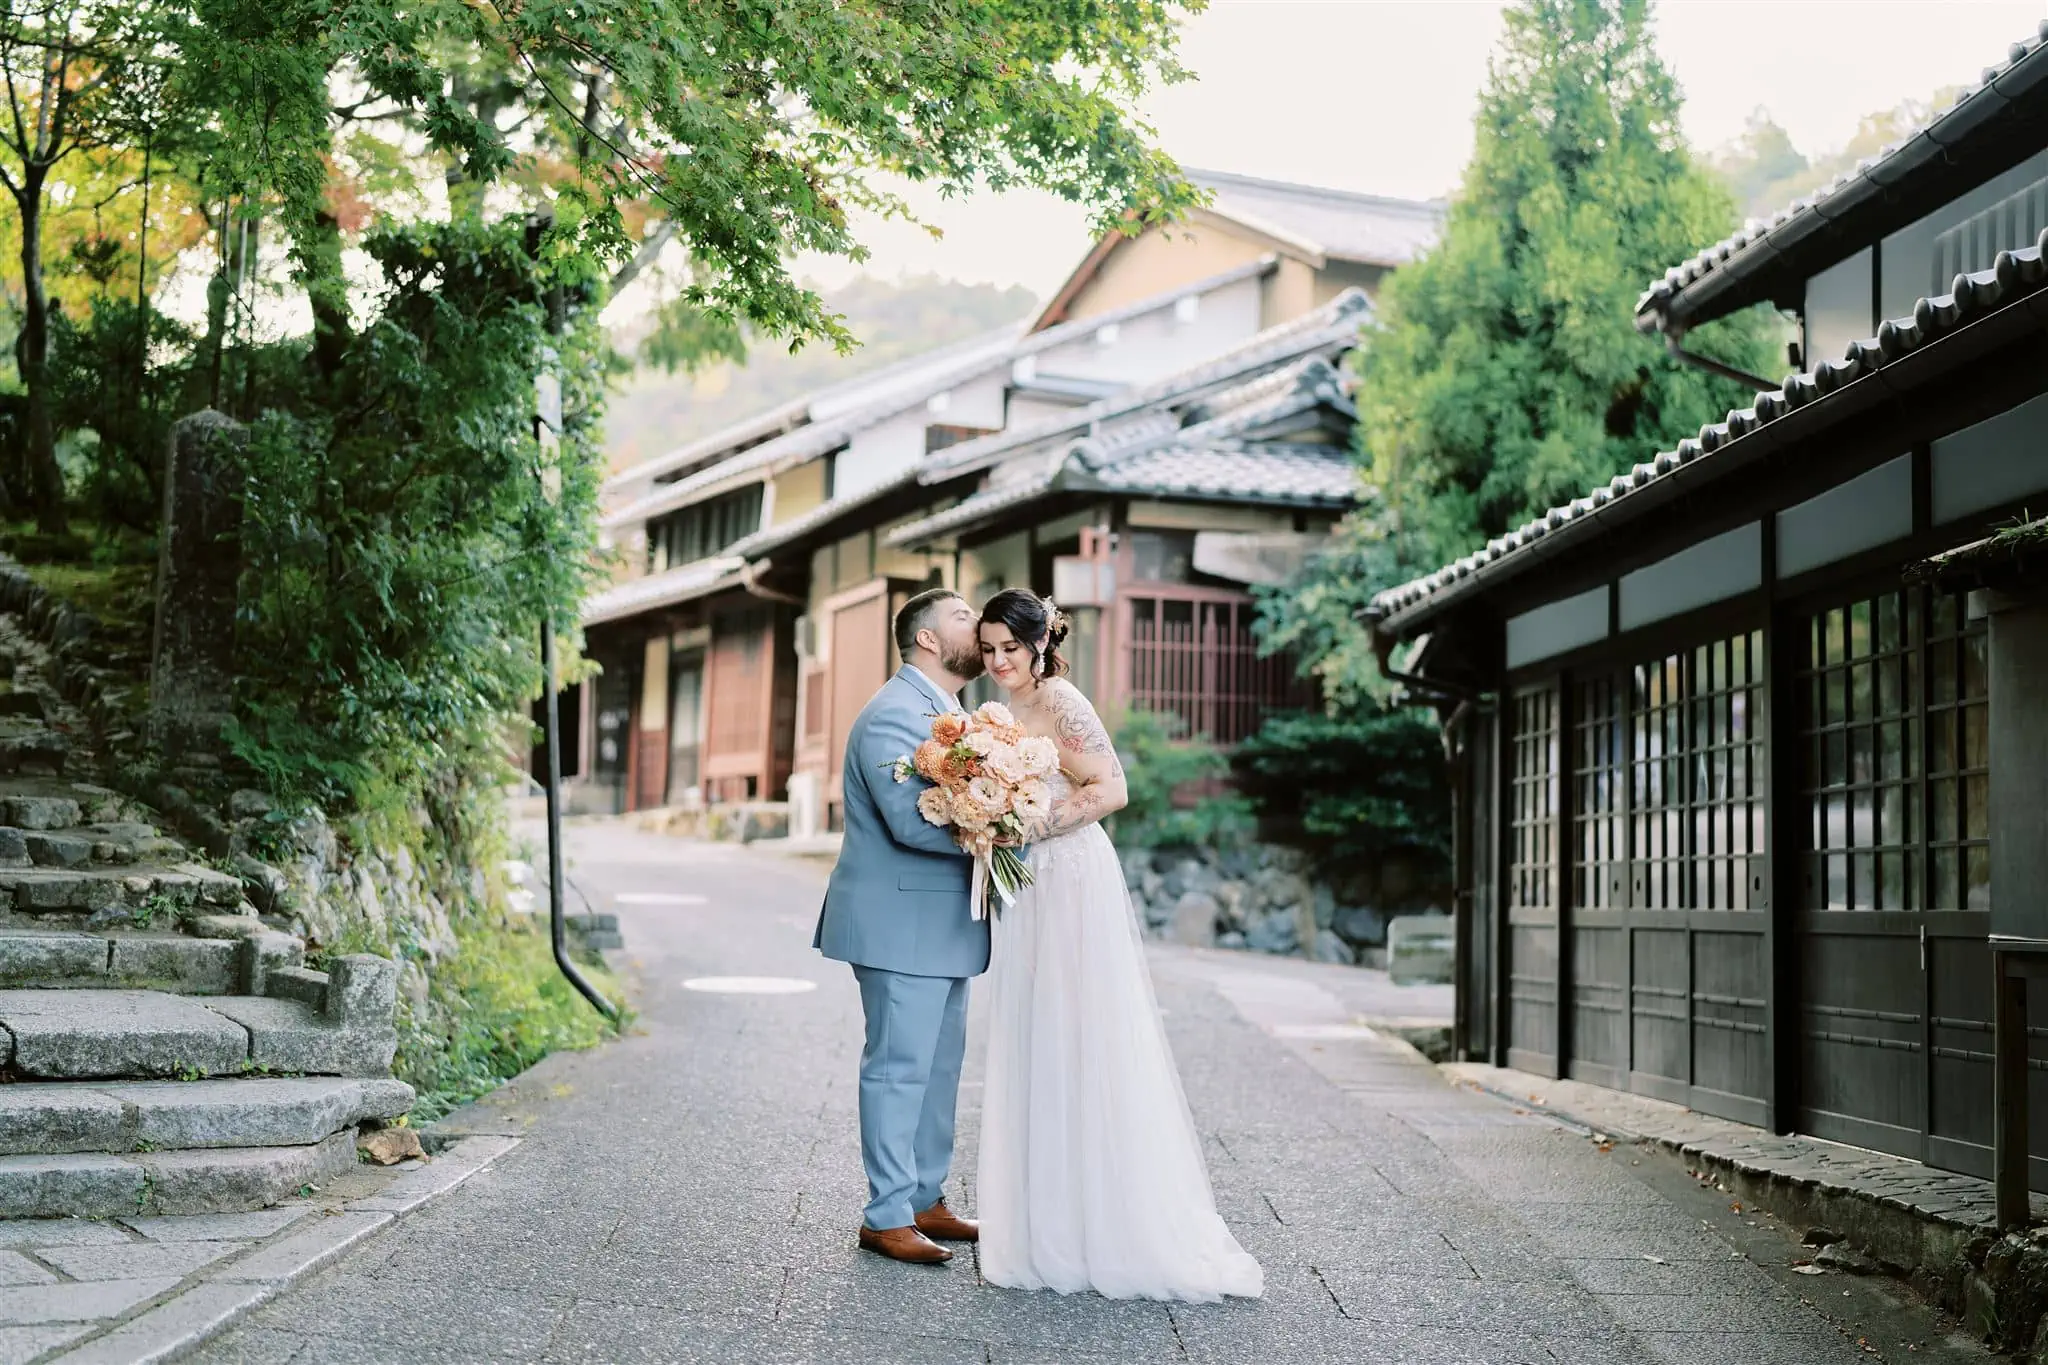 Kyoto Tokyo Japan Elopement Wedding Photographer, Planner & Videographer | A photographer captures a bride and groom's romantic kiss during their Japan elopement in front of a traditional Japanese house.